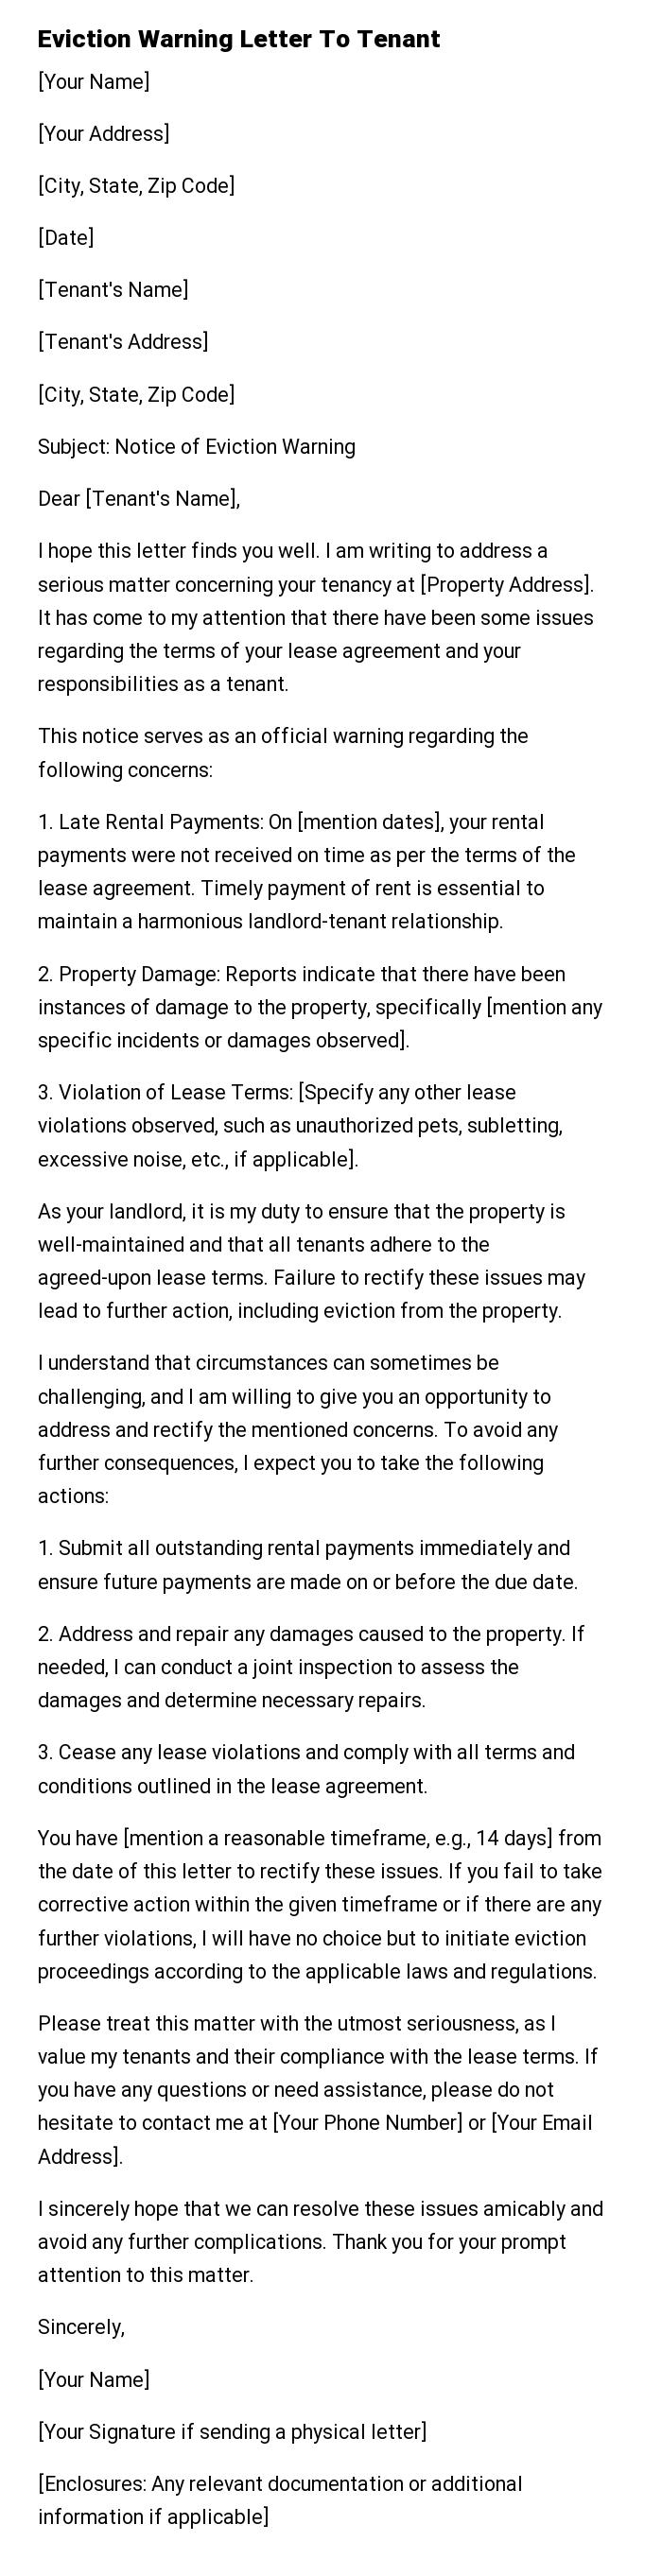 Eviction Warning Letter To Tenant